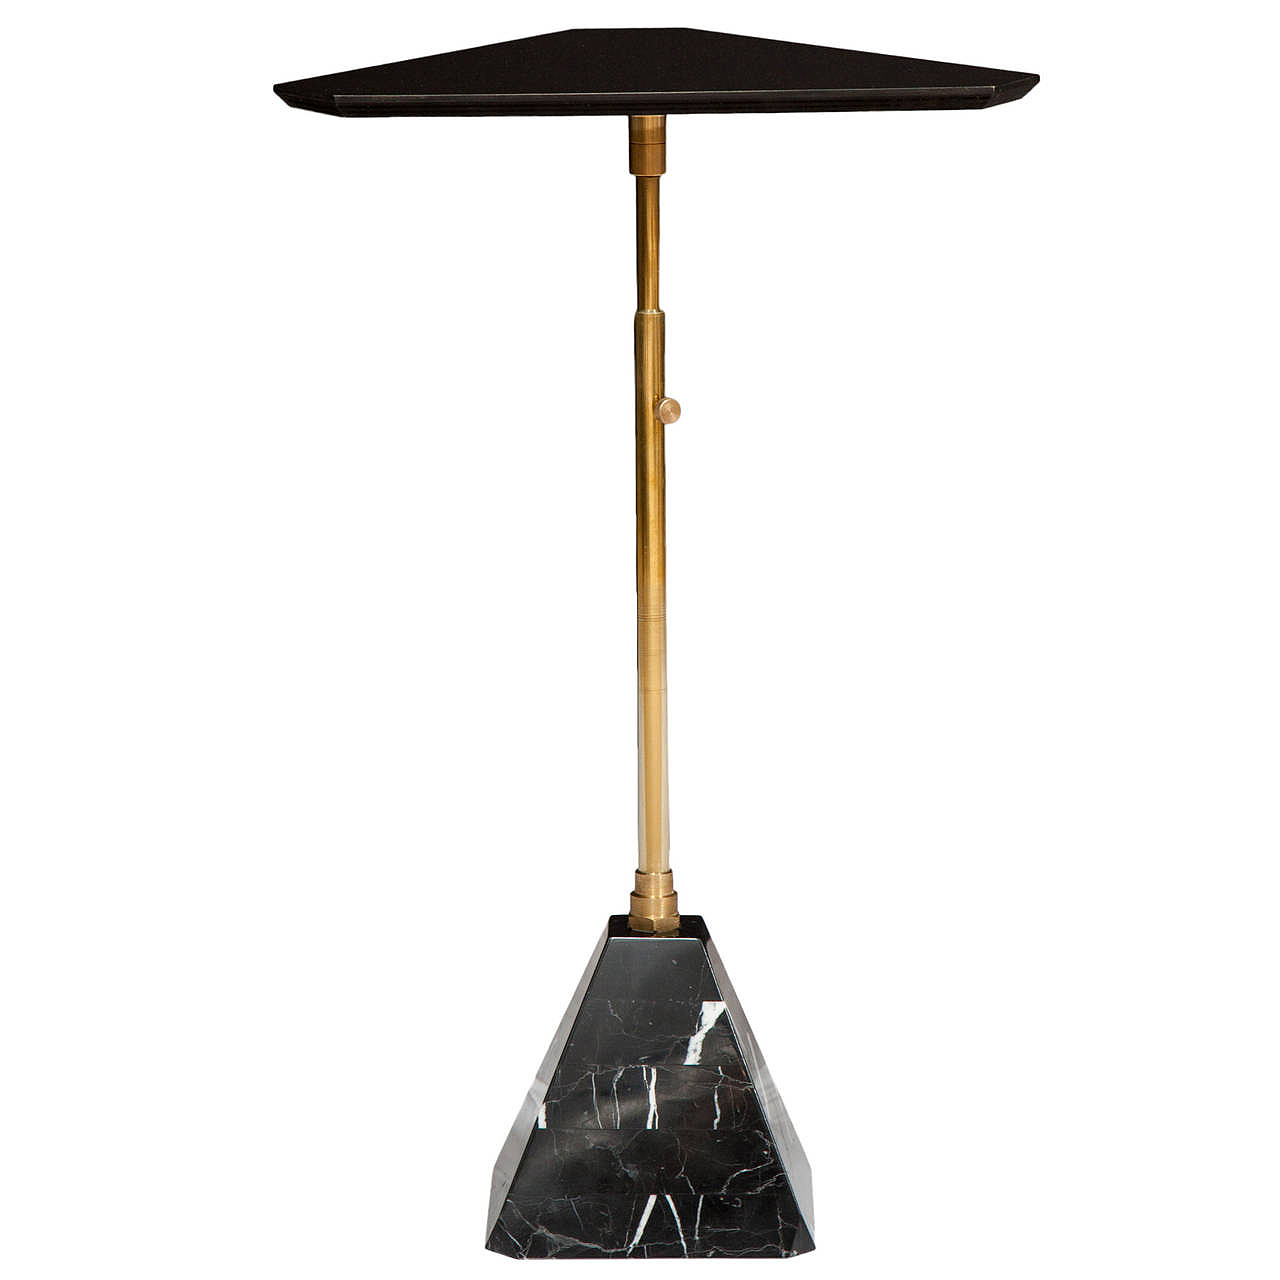   Black colorfin top   Telescoping brass post   Nero Marquina marble base  22” H x 15” W x 15” D 